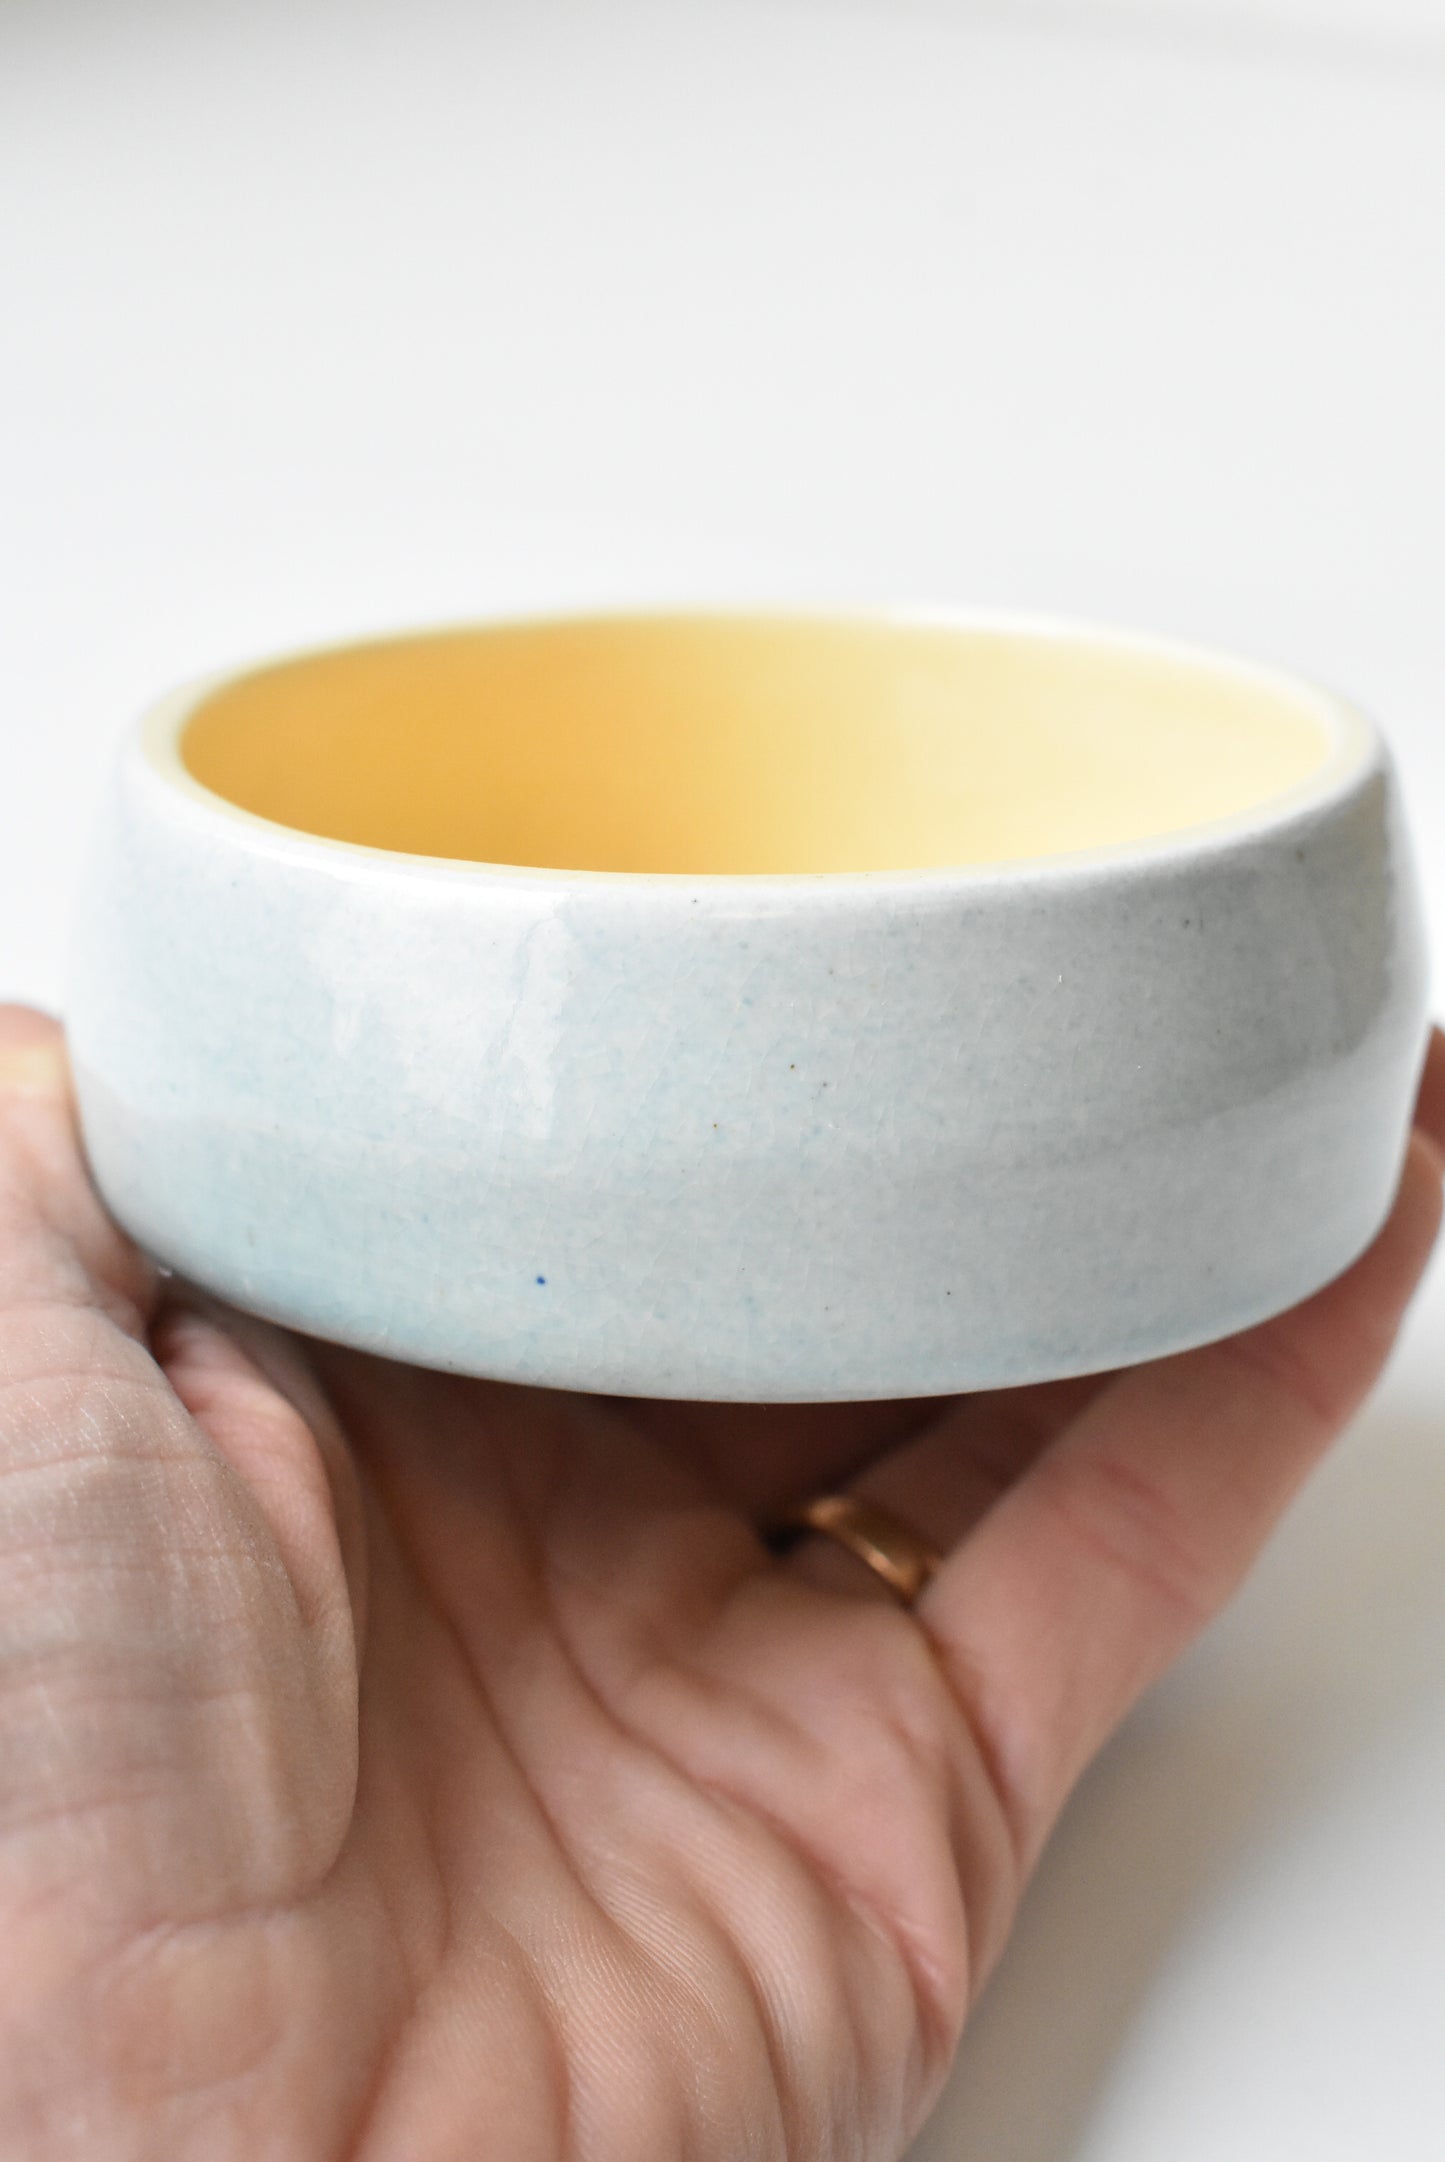 O.C Stephens small yellow and blue glazed dish